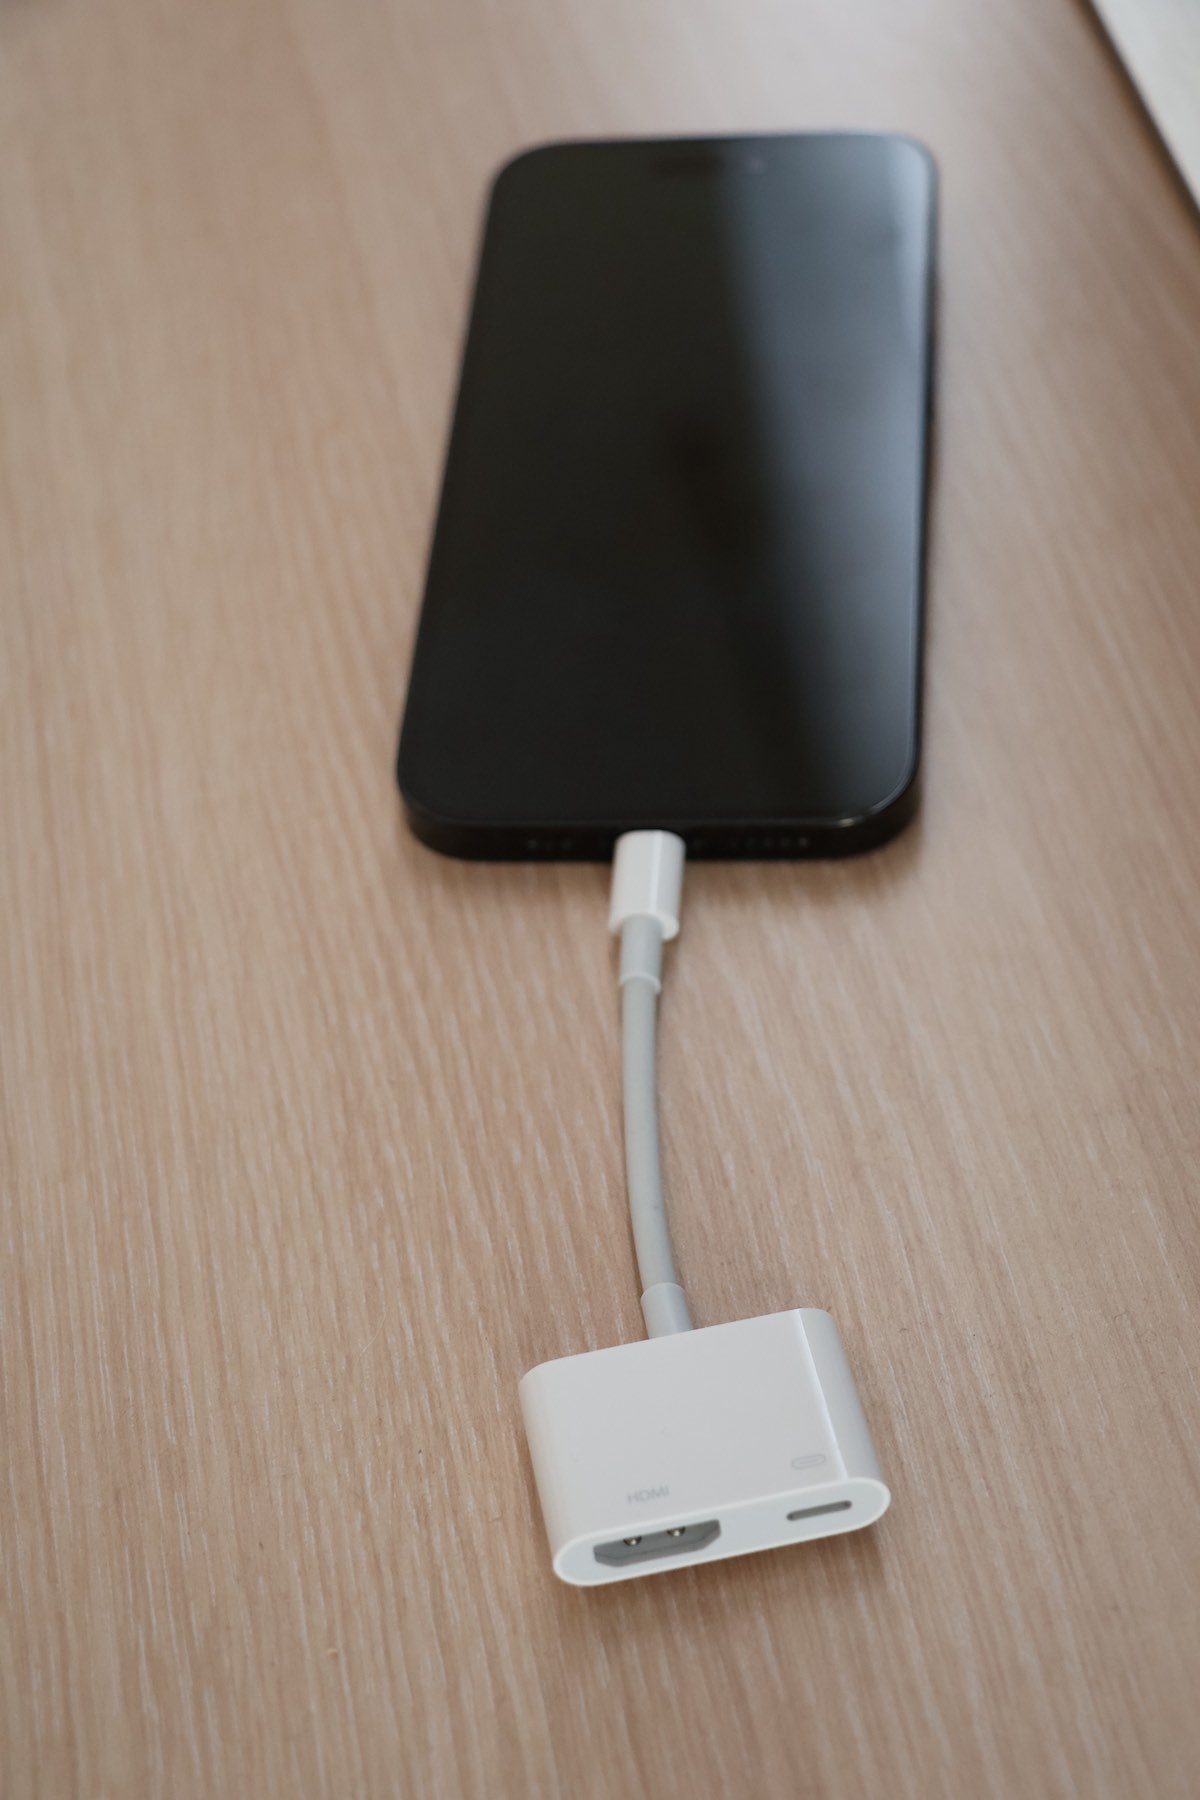 Connect adapter to your iPhone